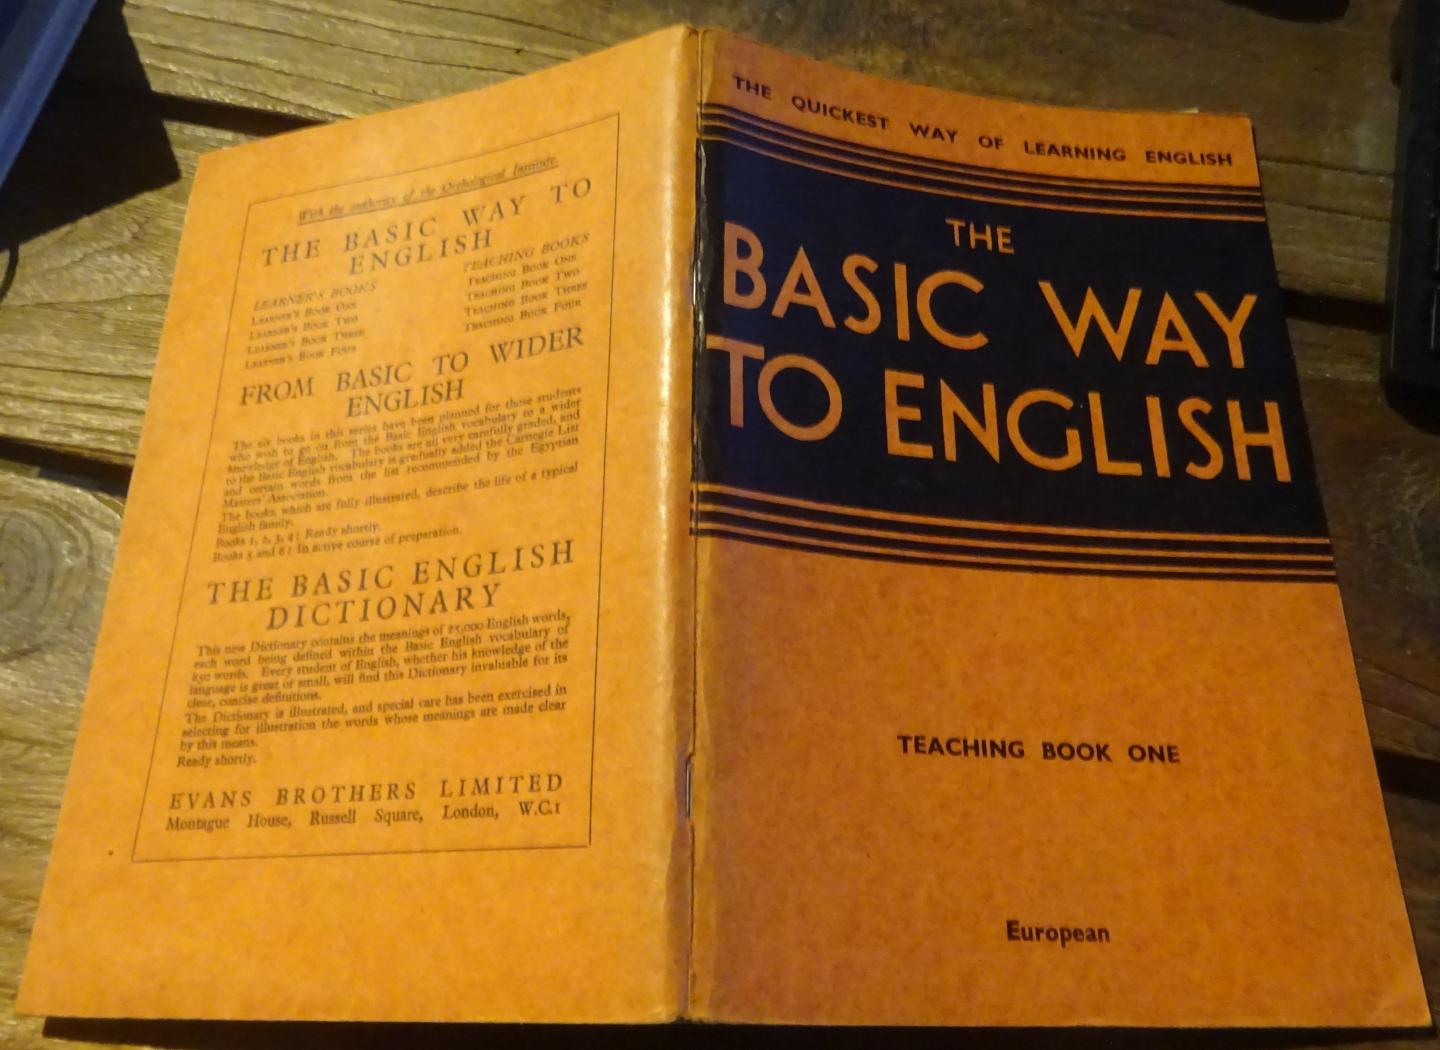 diverse - The Basic Way to English - Teaching book one